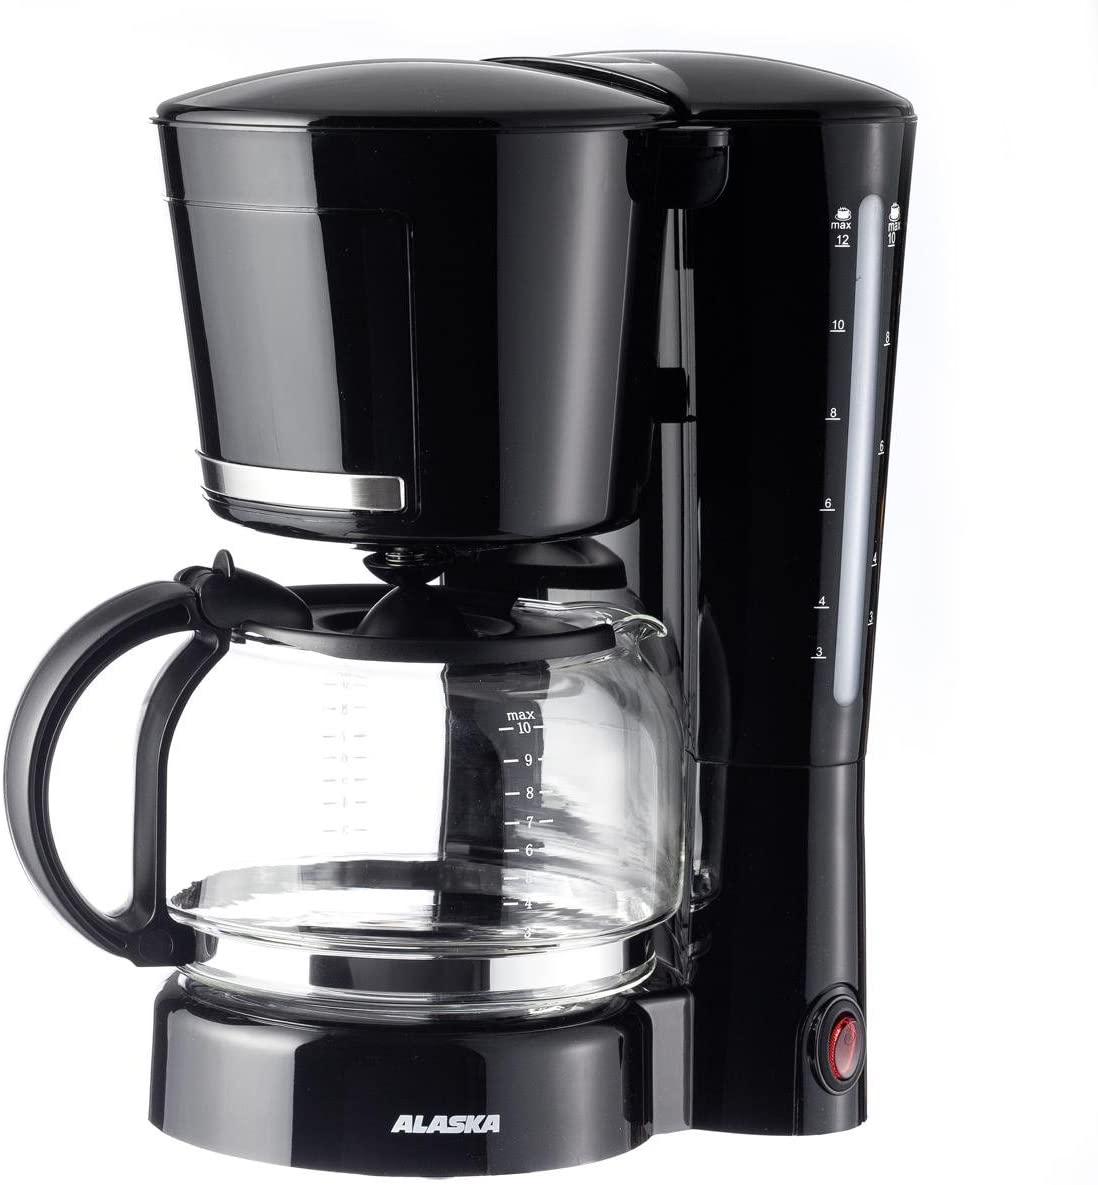 Alaska CM 2209 DSG Coffee Machine | Up to 12 Cups | 870 Watt | Removable Filter Insert | Filter Size 1x4 | Drip Stop Function | Water Level Indicator | Keep Warm Function | Control Light (Black)